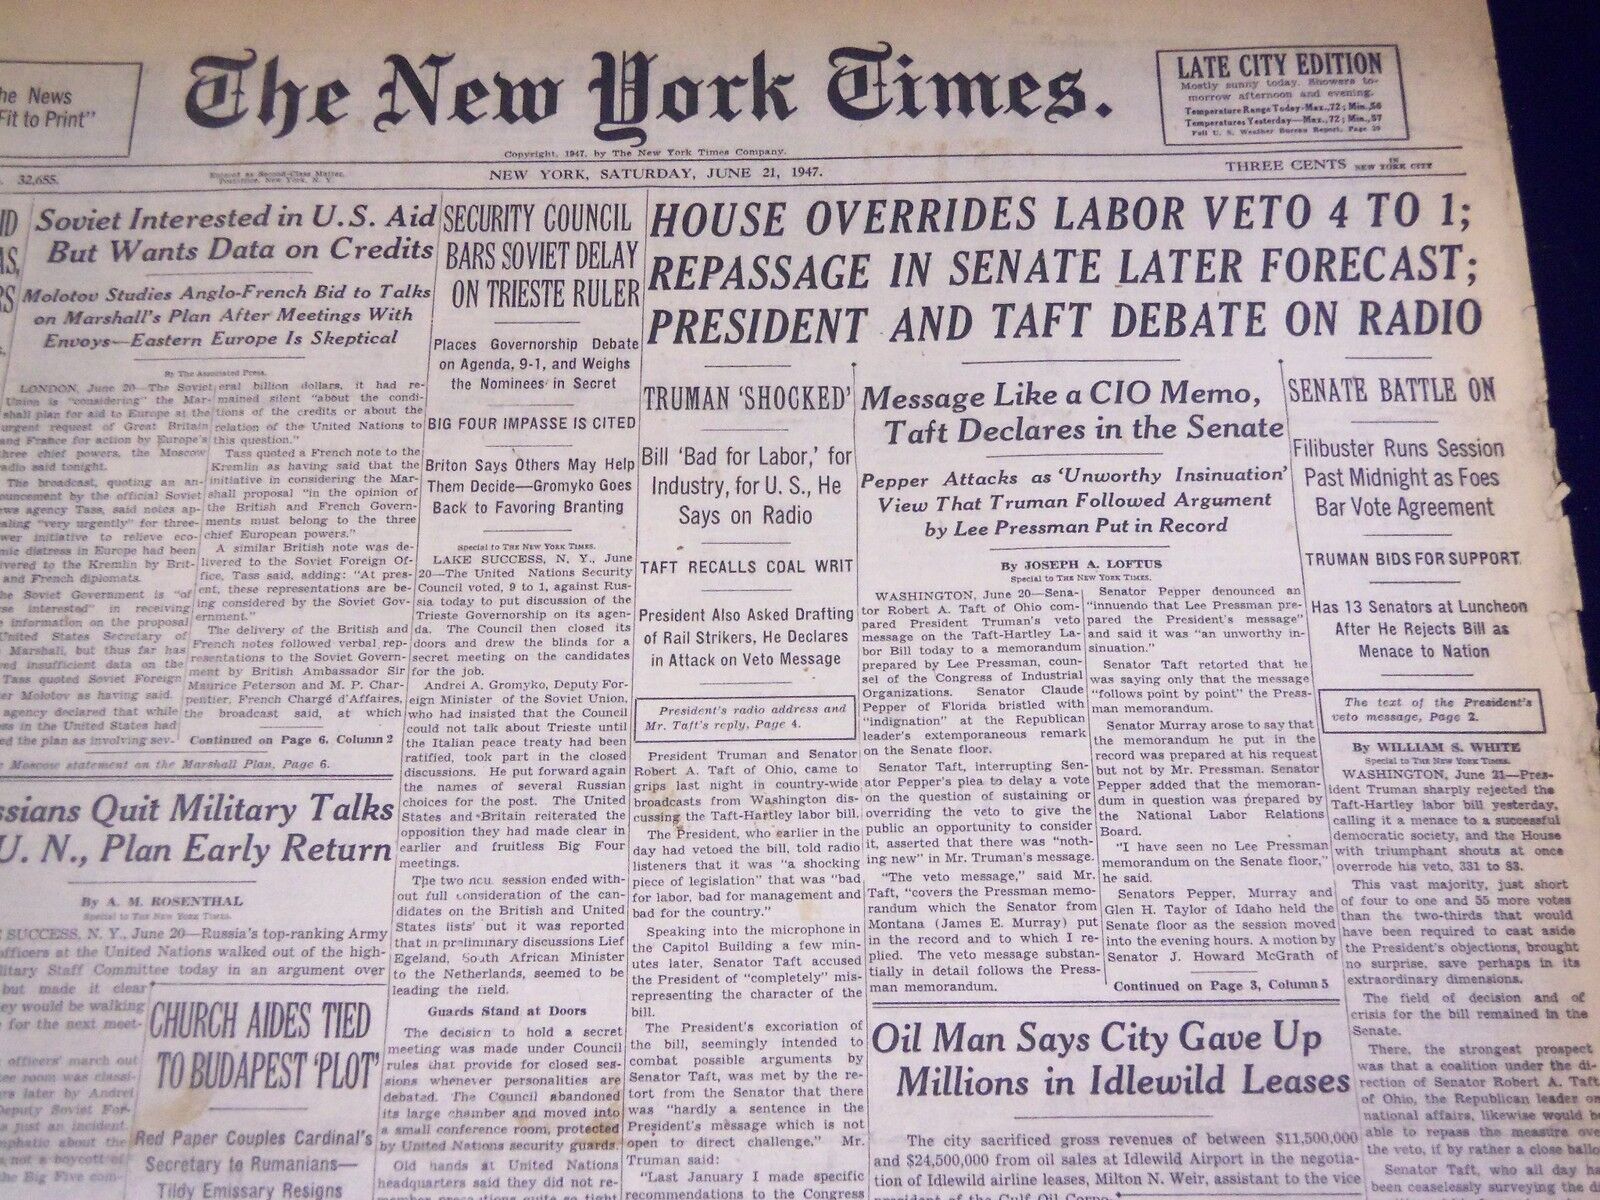 1947 JUNE 21 NEW YORK TIMES - HOUSE OVERRIDES LABOR VETO 4 TO 1 - NT 1423